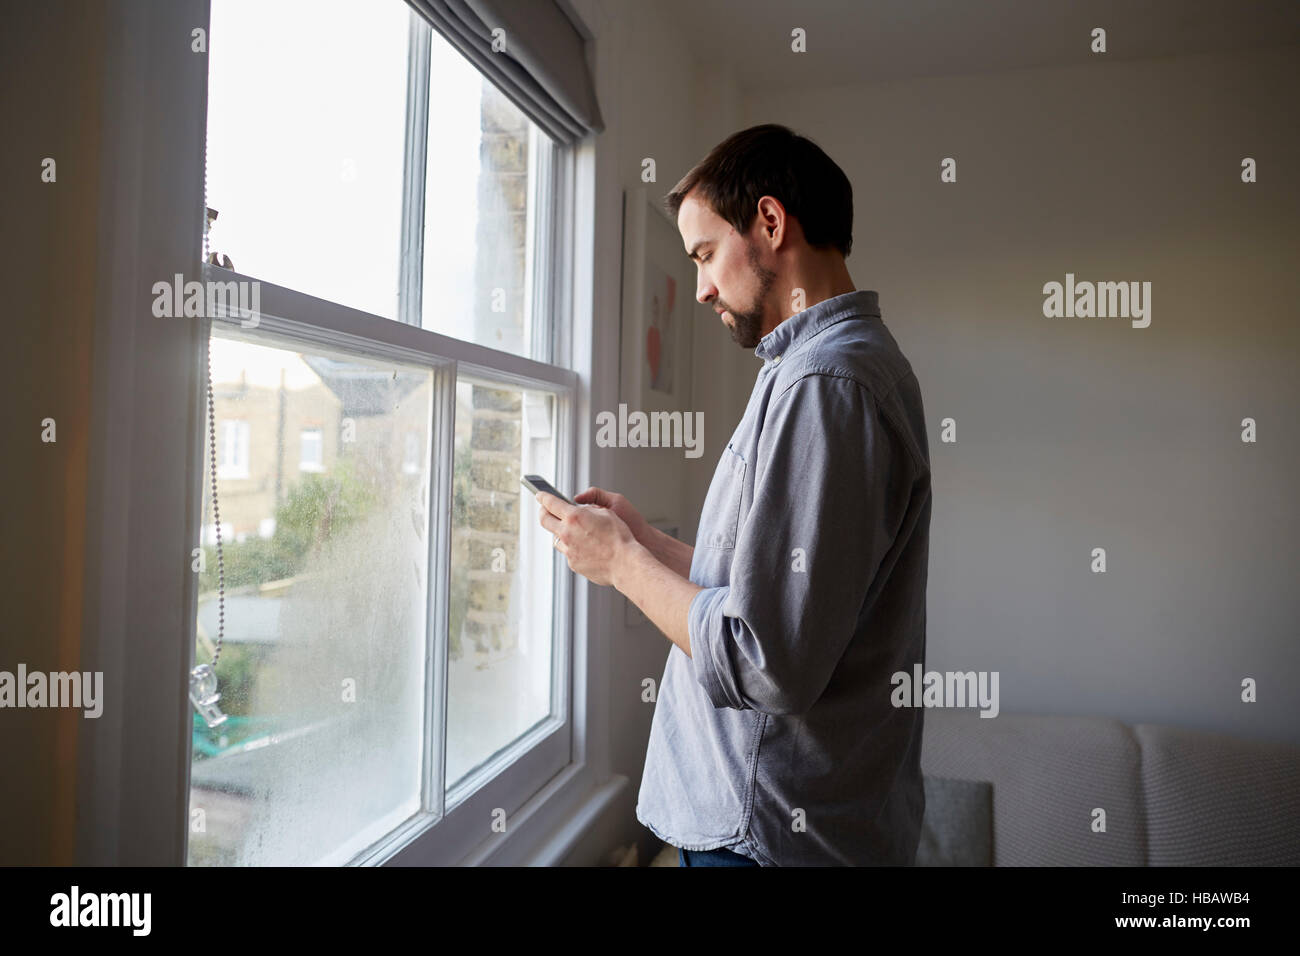 Mid adult man at living room window reading smartphone texts Stock Photo